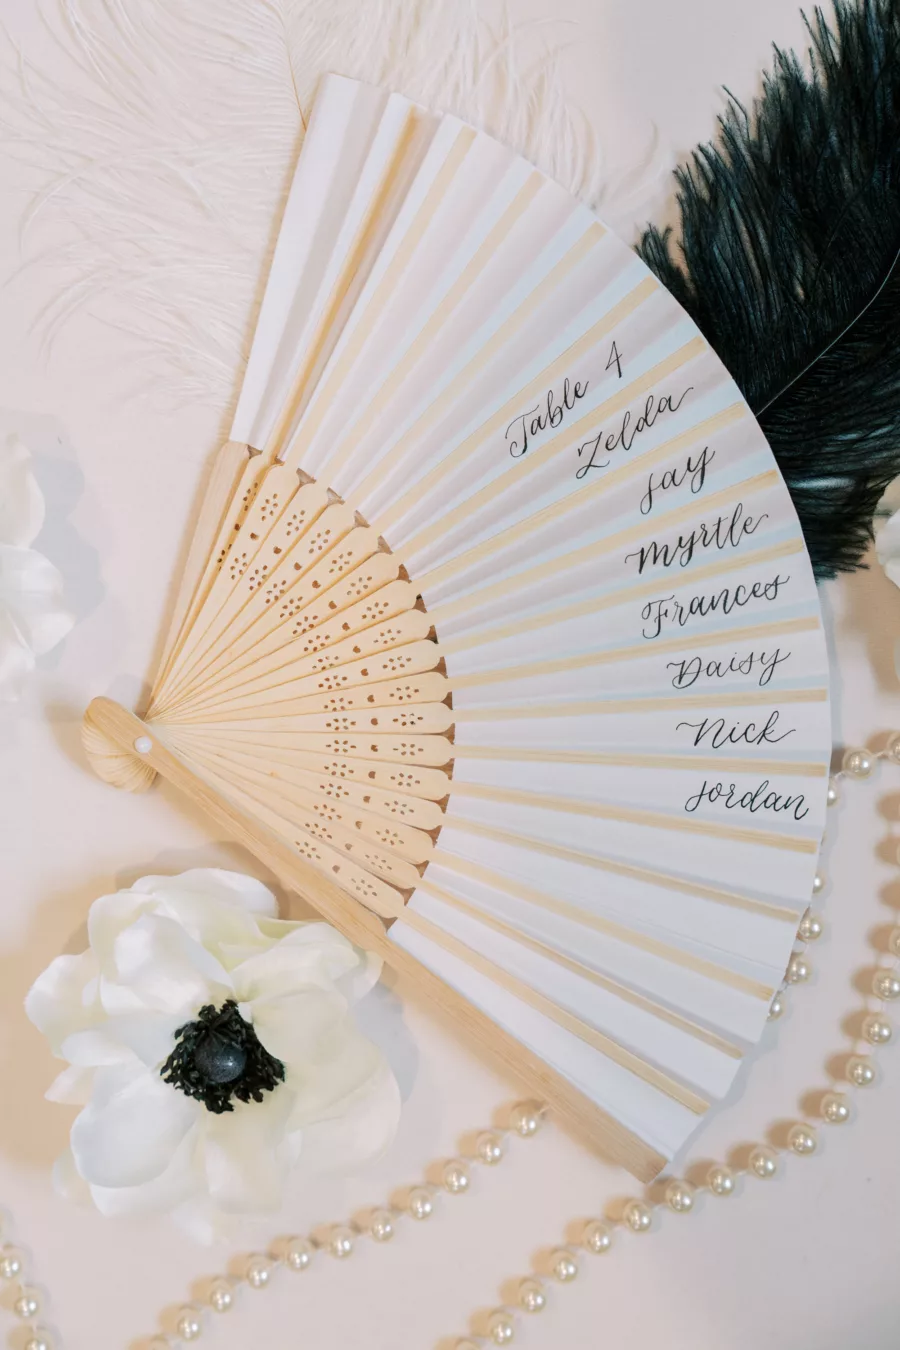 Vintage 1920s Great Gatsby Inspired Wedding Reception Fan Seating Chart Ideas | Tampa bay Calligrapher Inky Fingers Calligraphy